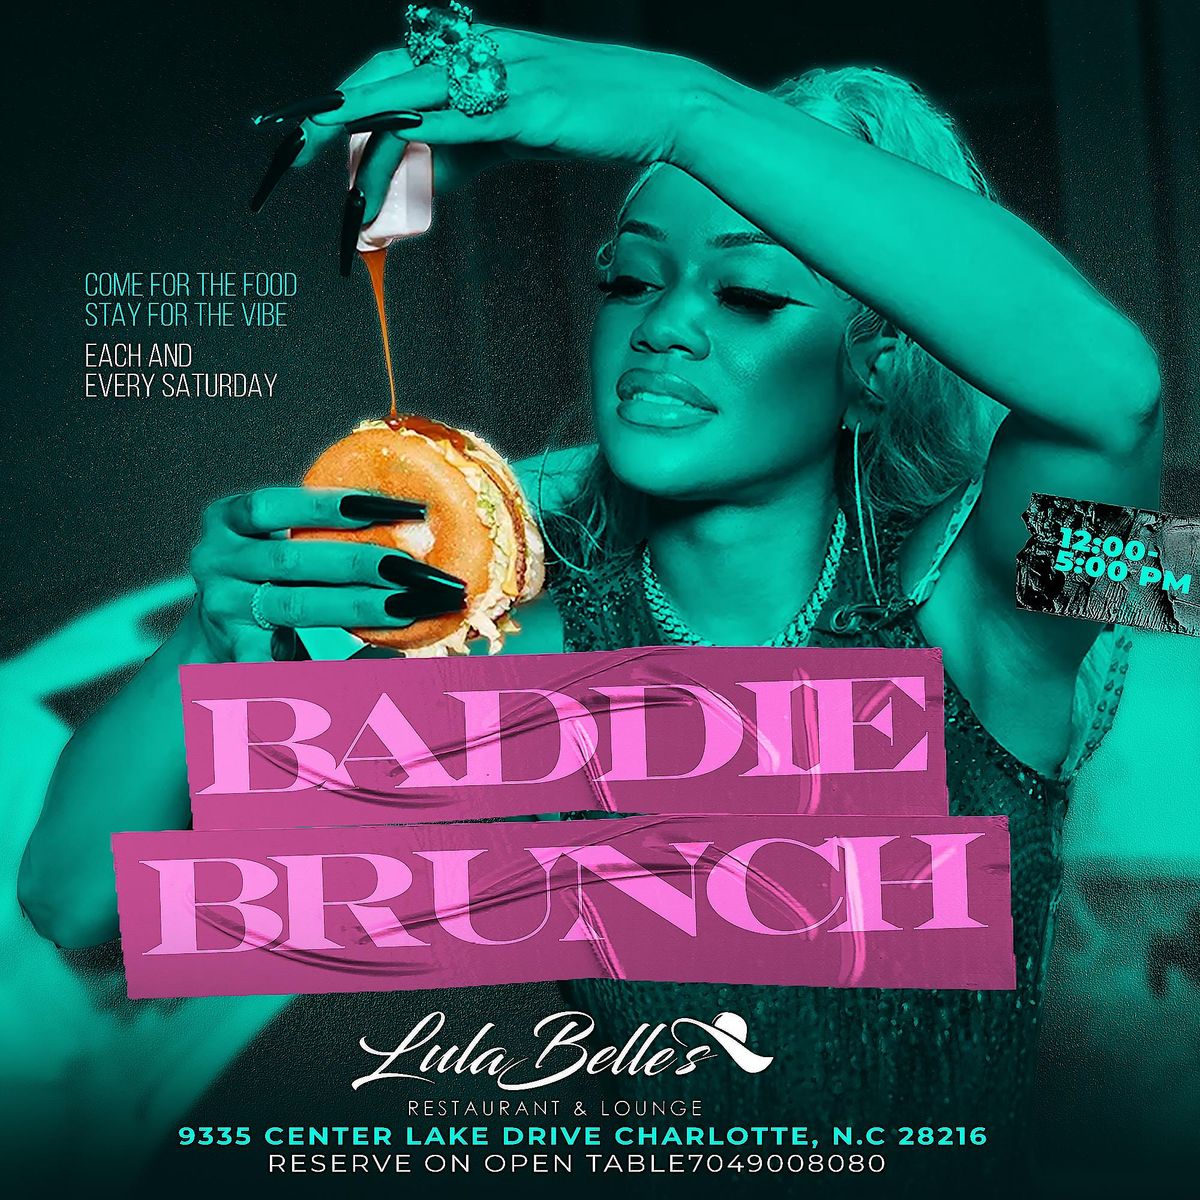 Baddie brunch each and every Saturday  @ lulabelles!